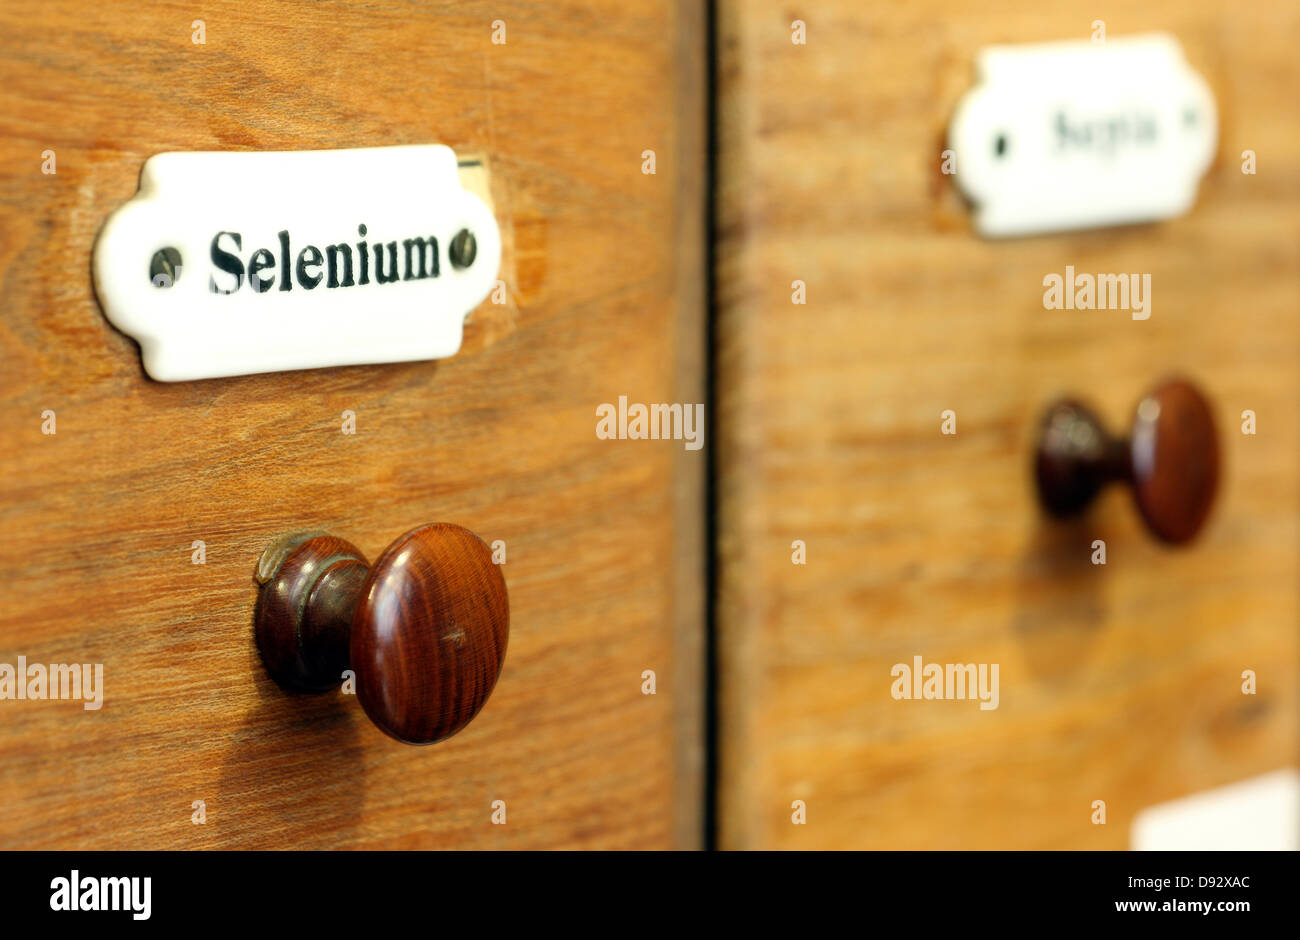 A wooden drawer in pharmacy containing the chemical element Selenium Stock Photo